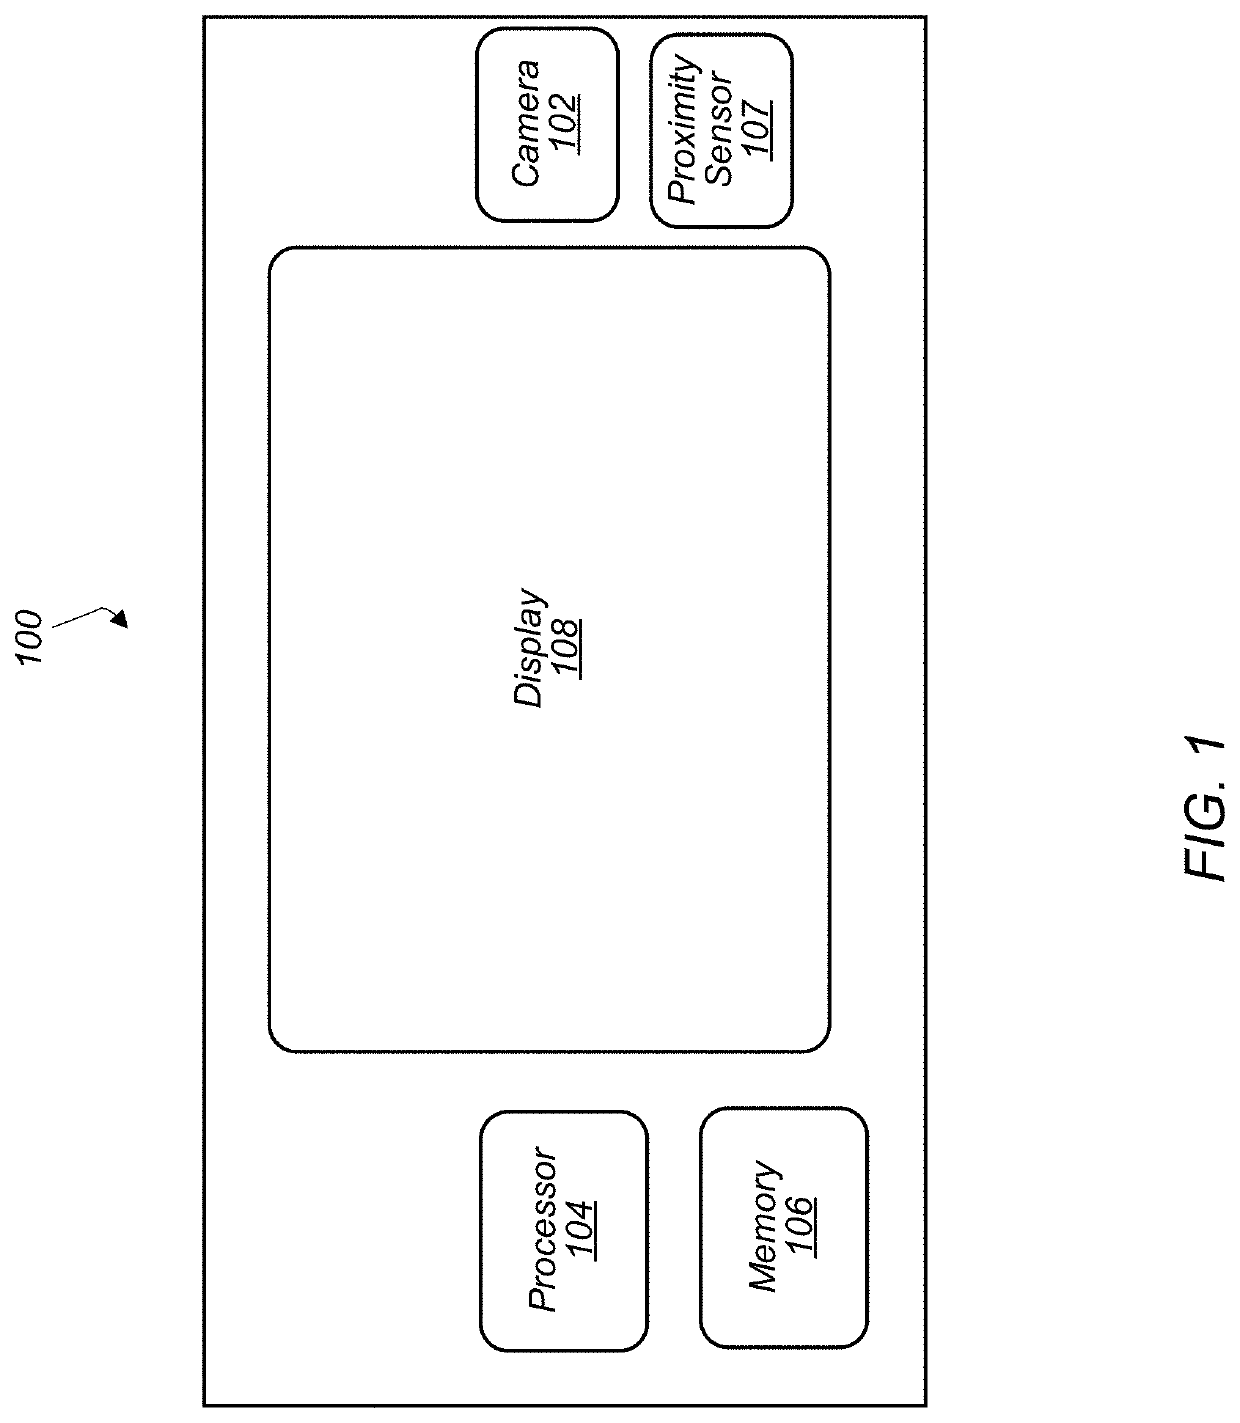 Obstruction detection during facial recognition processes